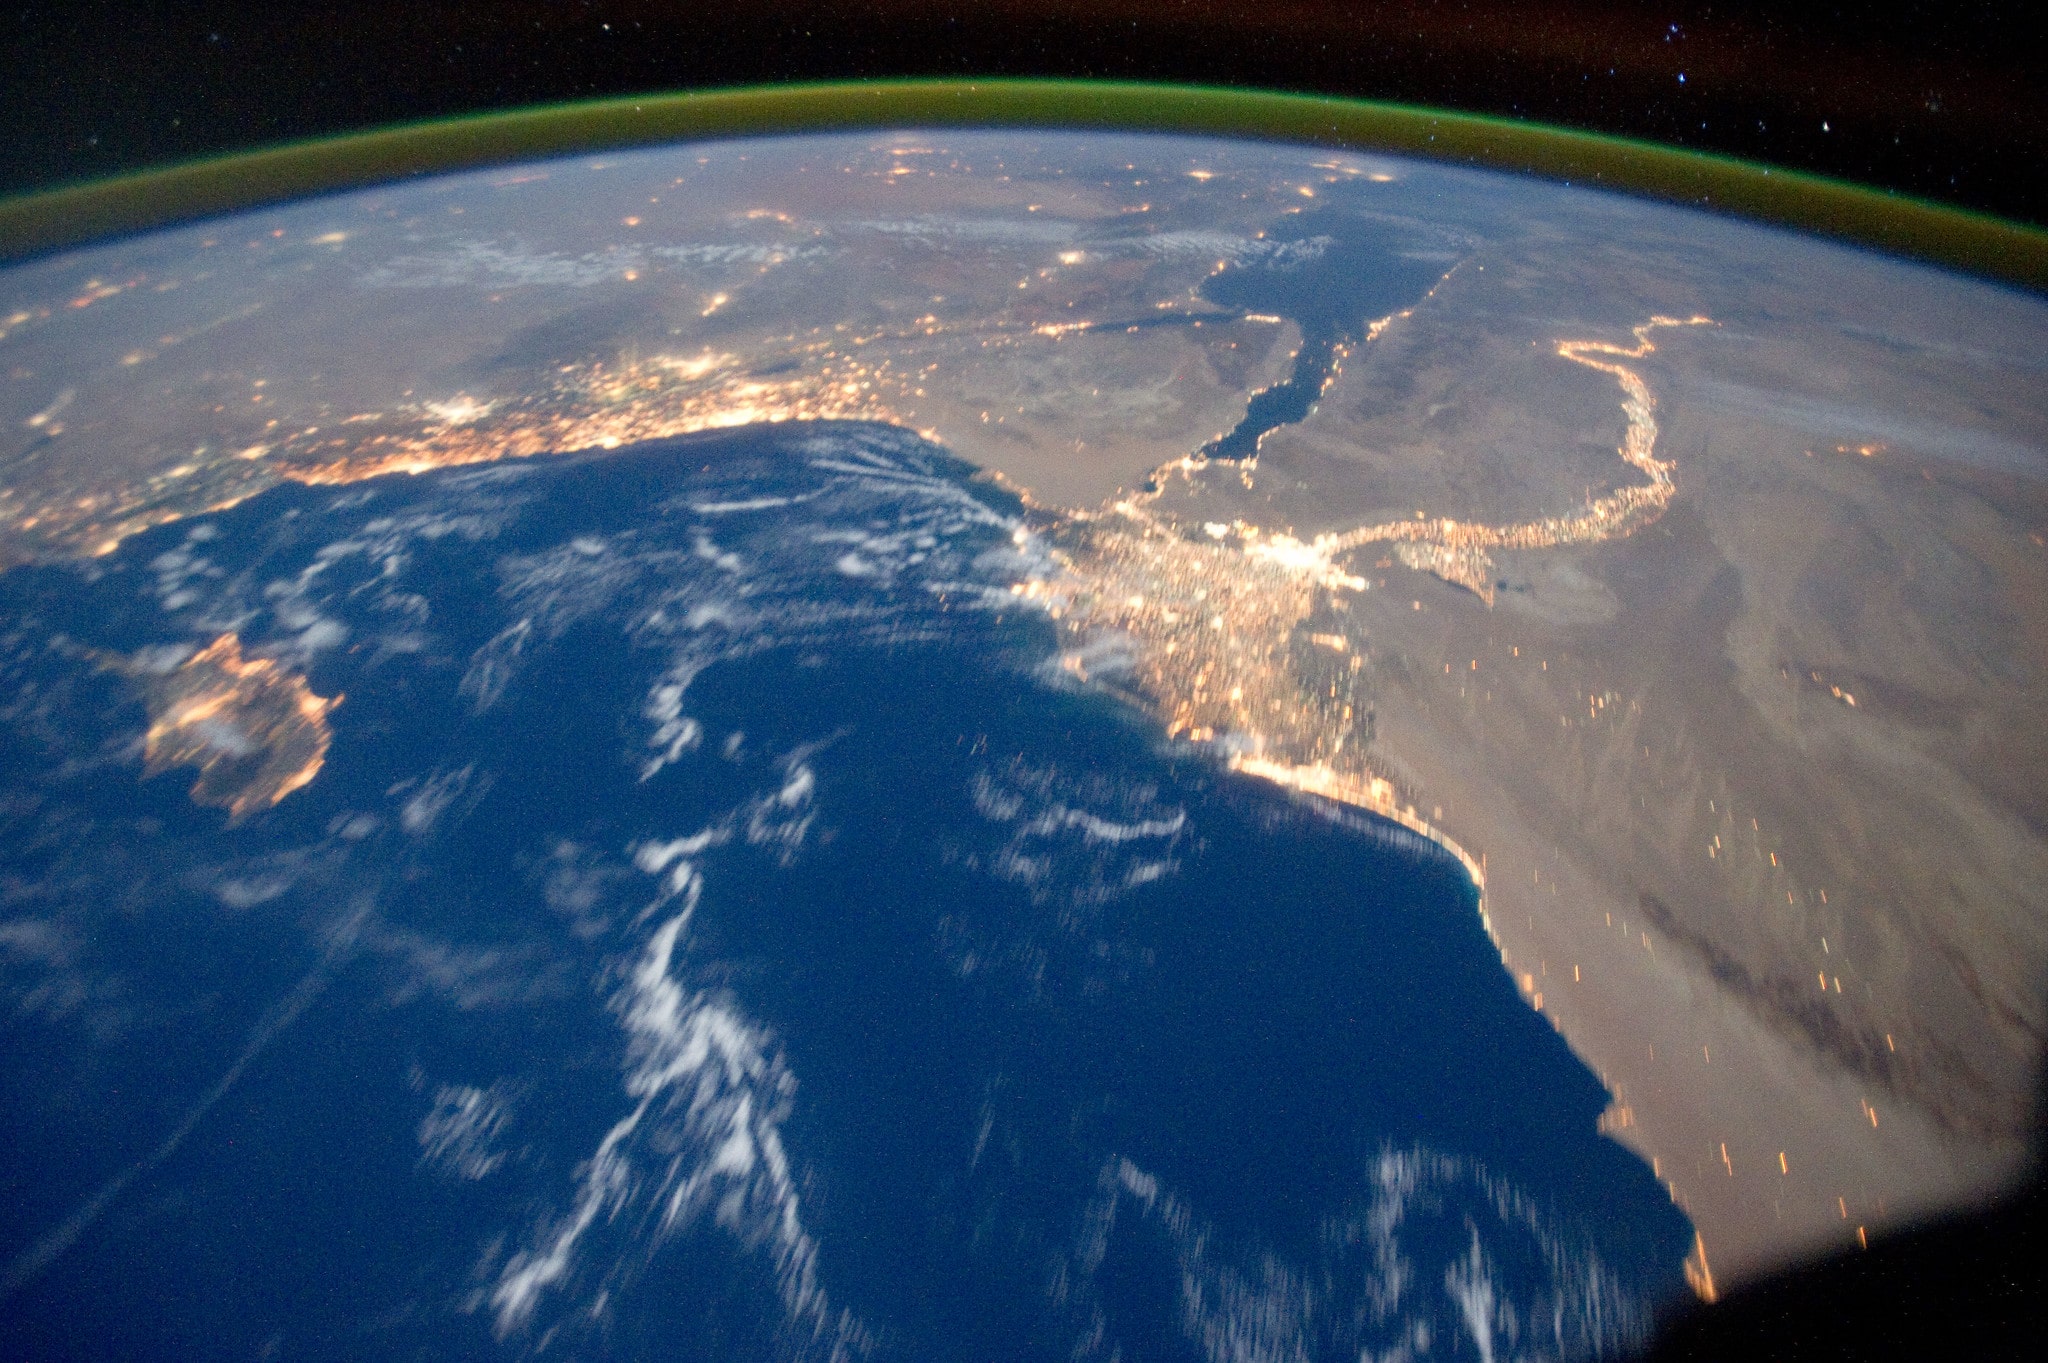 Space from the International Space Station